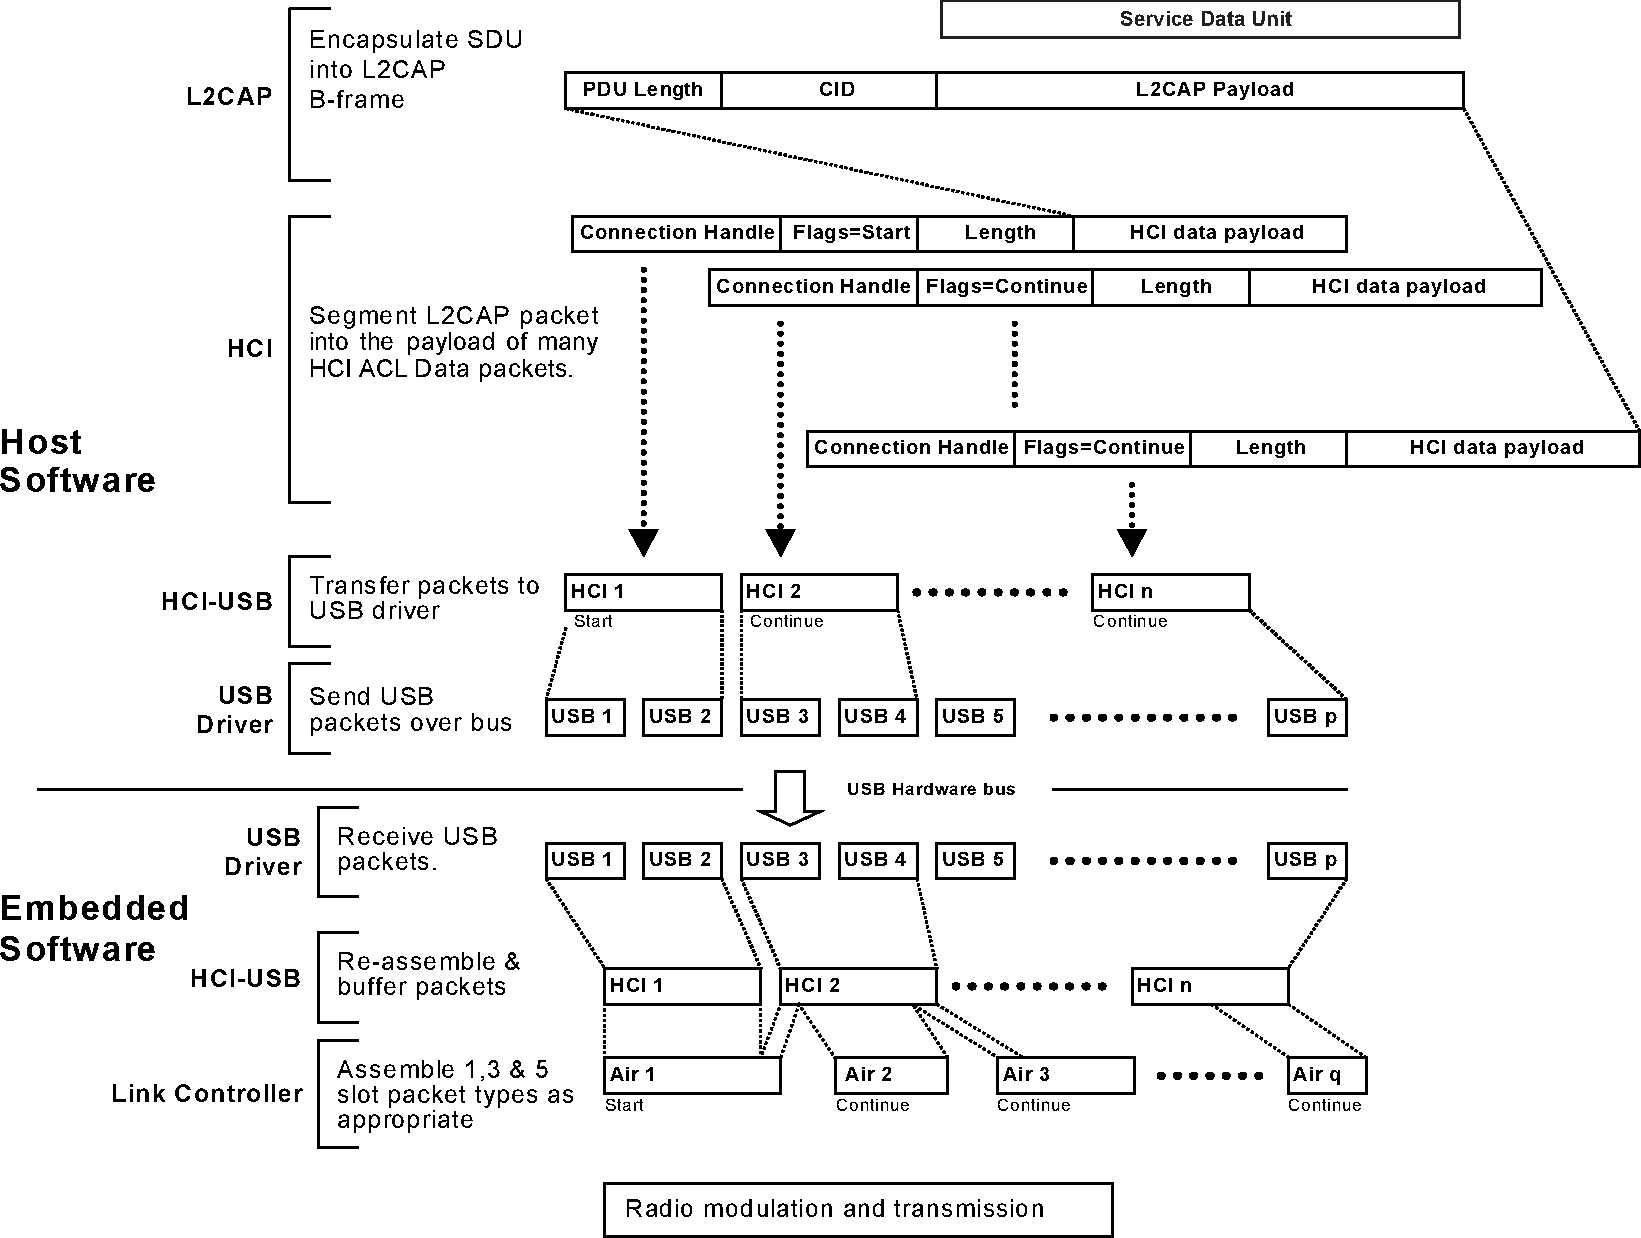 Example of fragmentation processes in a device with a BR/EDR Controller and USB HCI transport